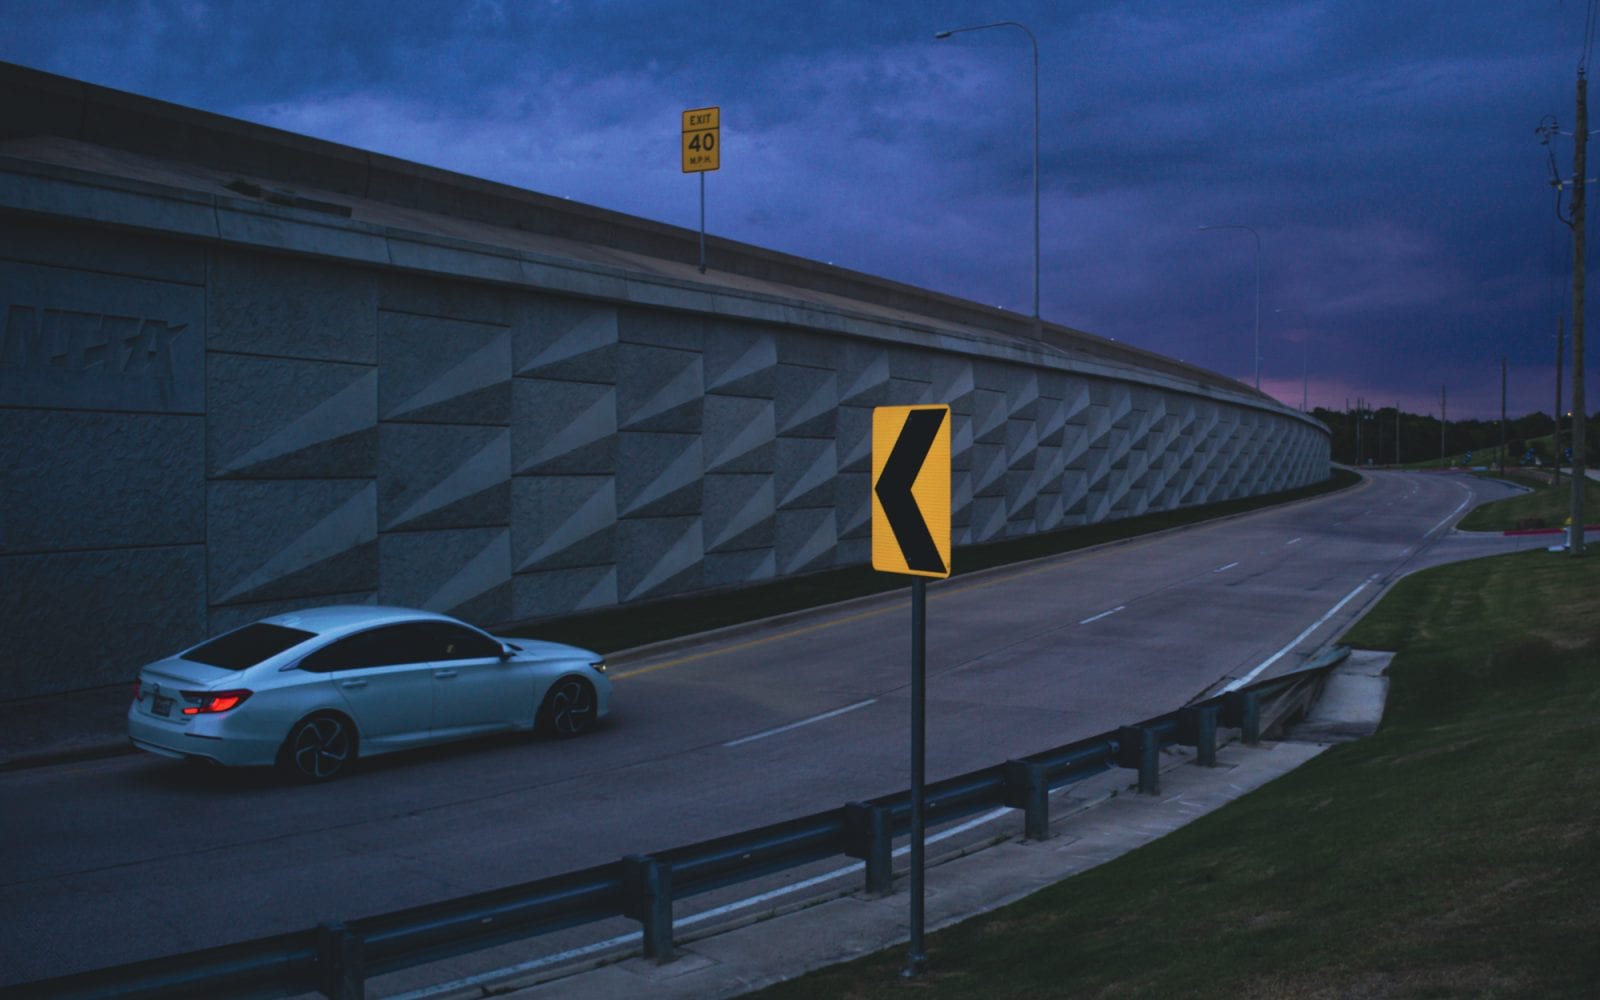 2021 Best Photos: Car driving along a service road at sunset